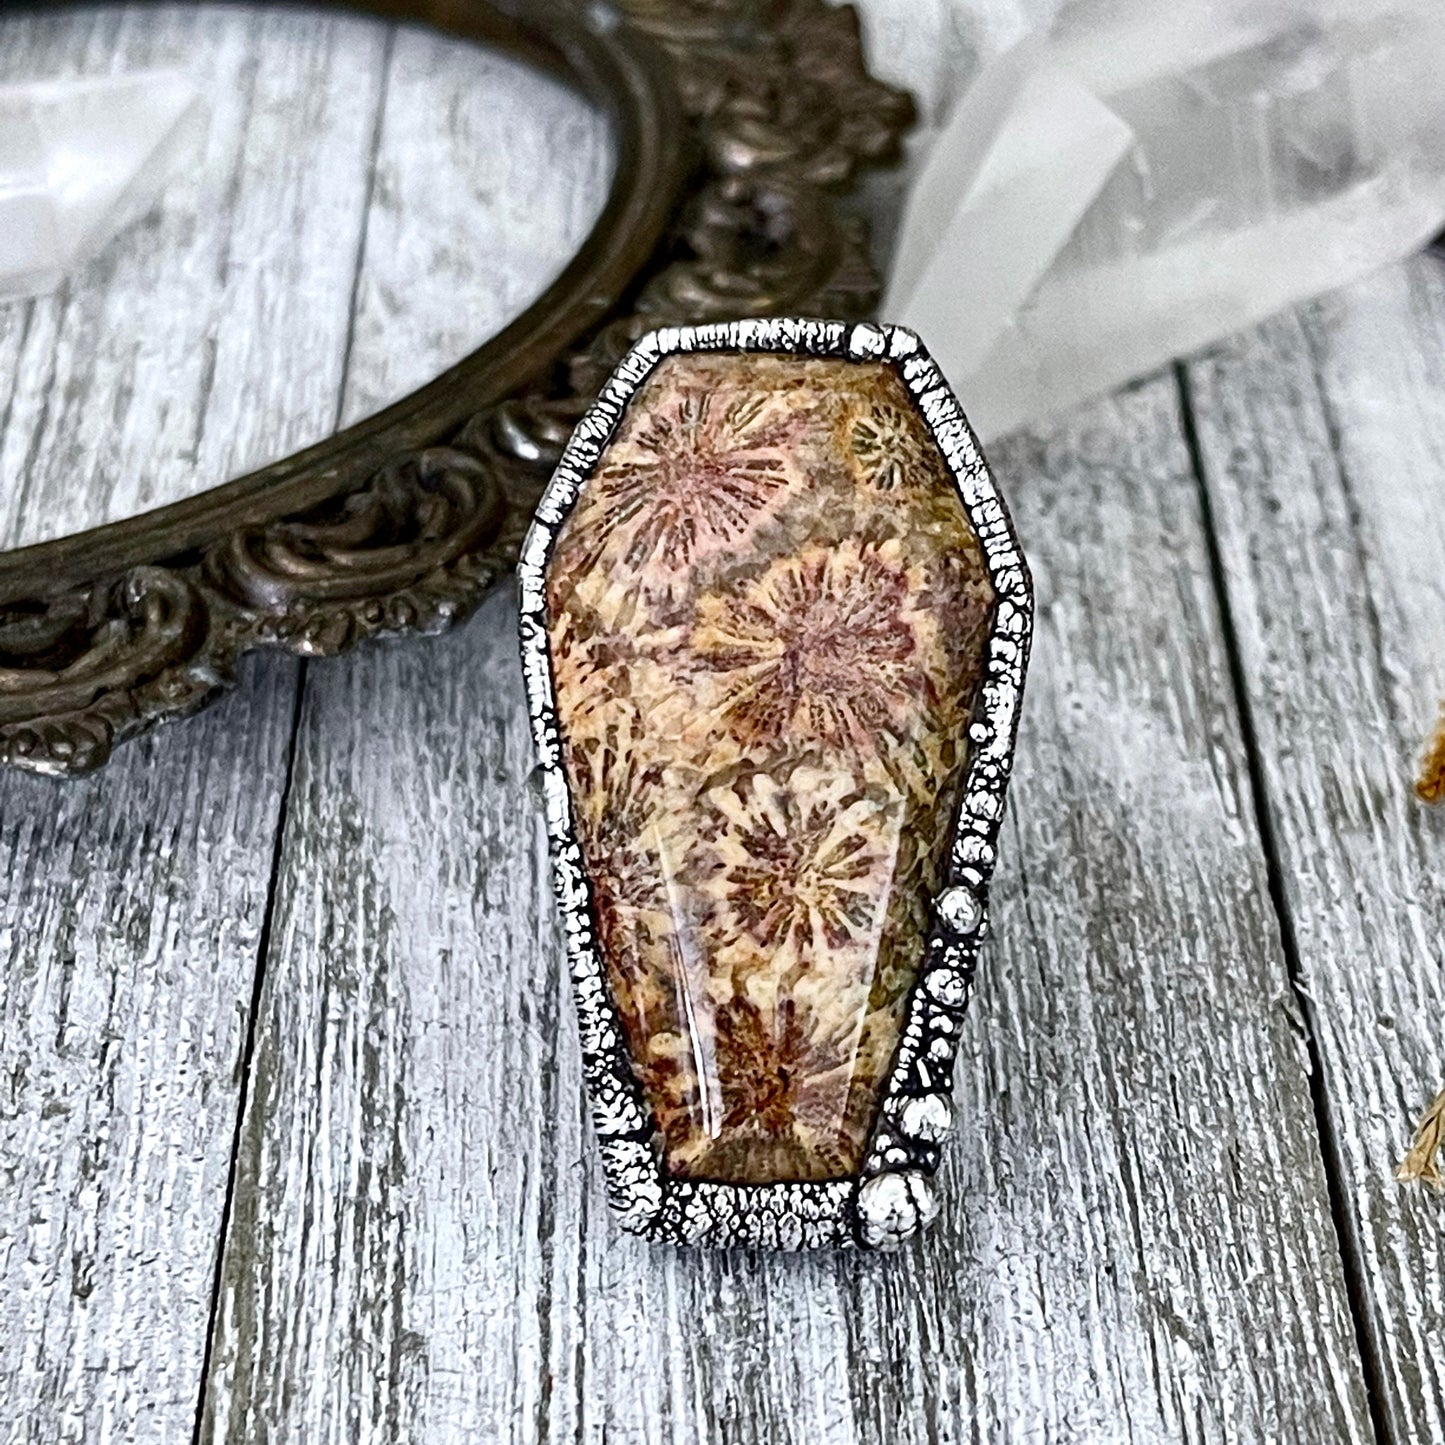 Size 8 Large Fossilized Coral Coffin Statement Ring in Fine Silver / Foxlark Collection - One of a Kind